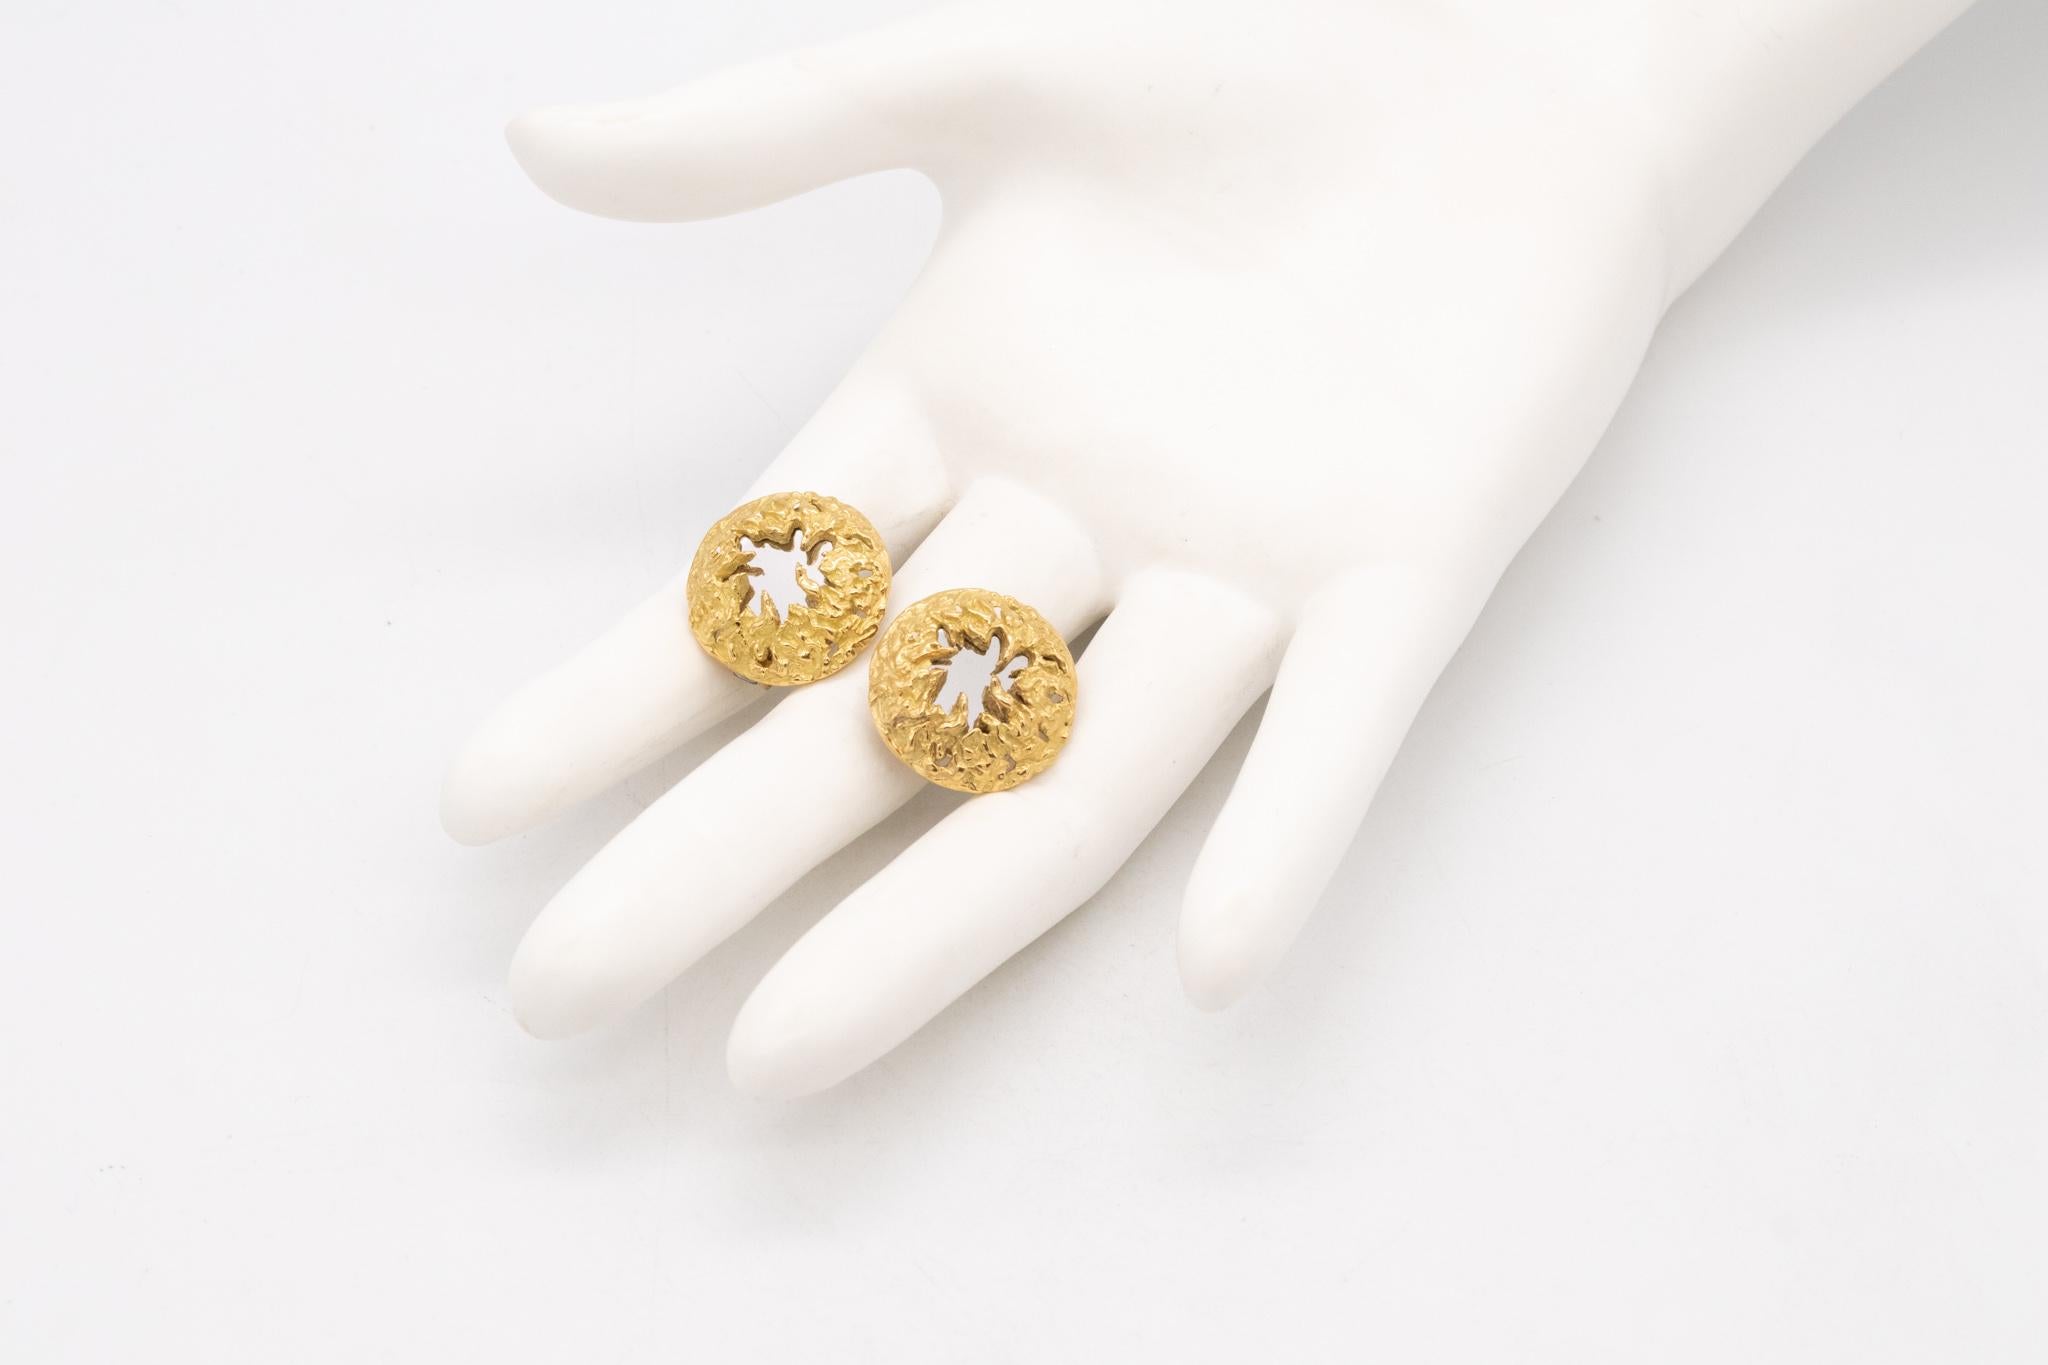 Chaumet 1970 Paris Retro Mirrored Clip Earrings in Textured 18Kt Yellow Gold In Excellent Condition For Sale In Miami, FL